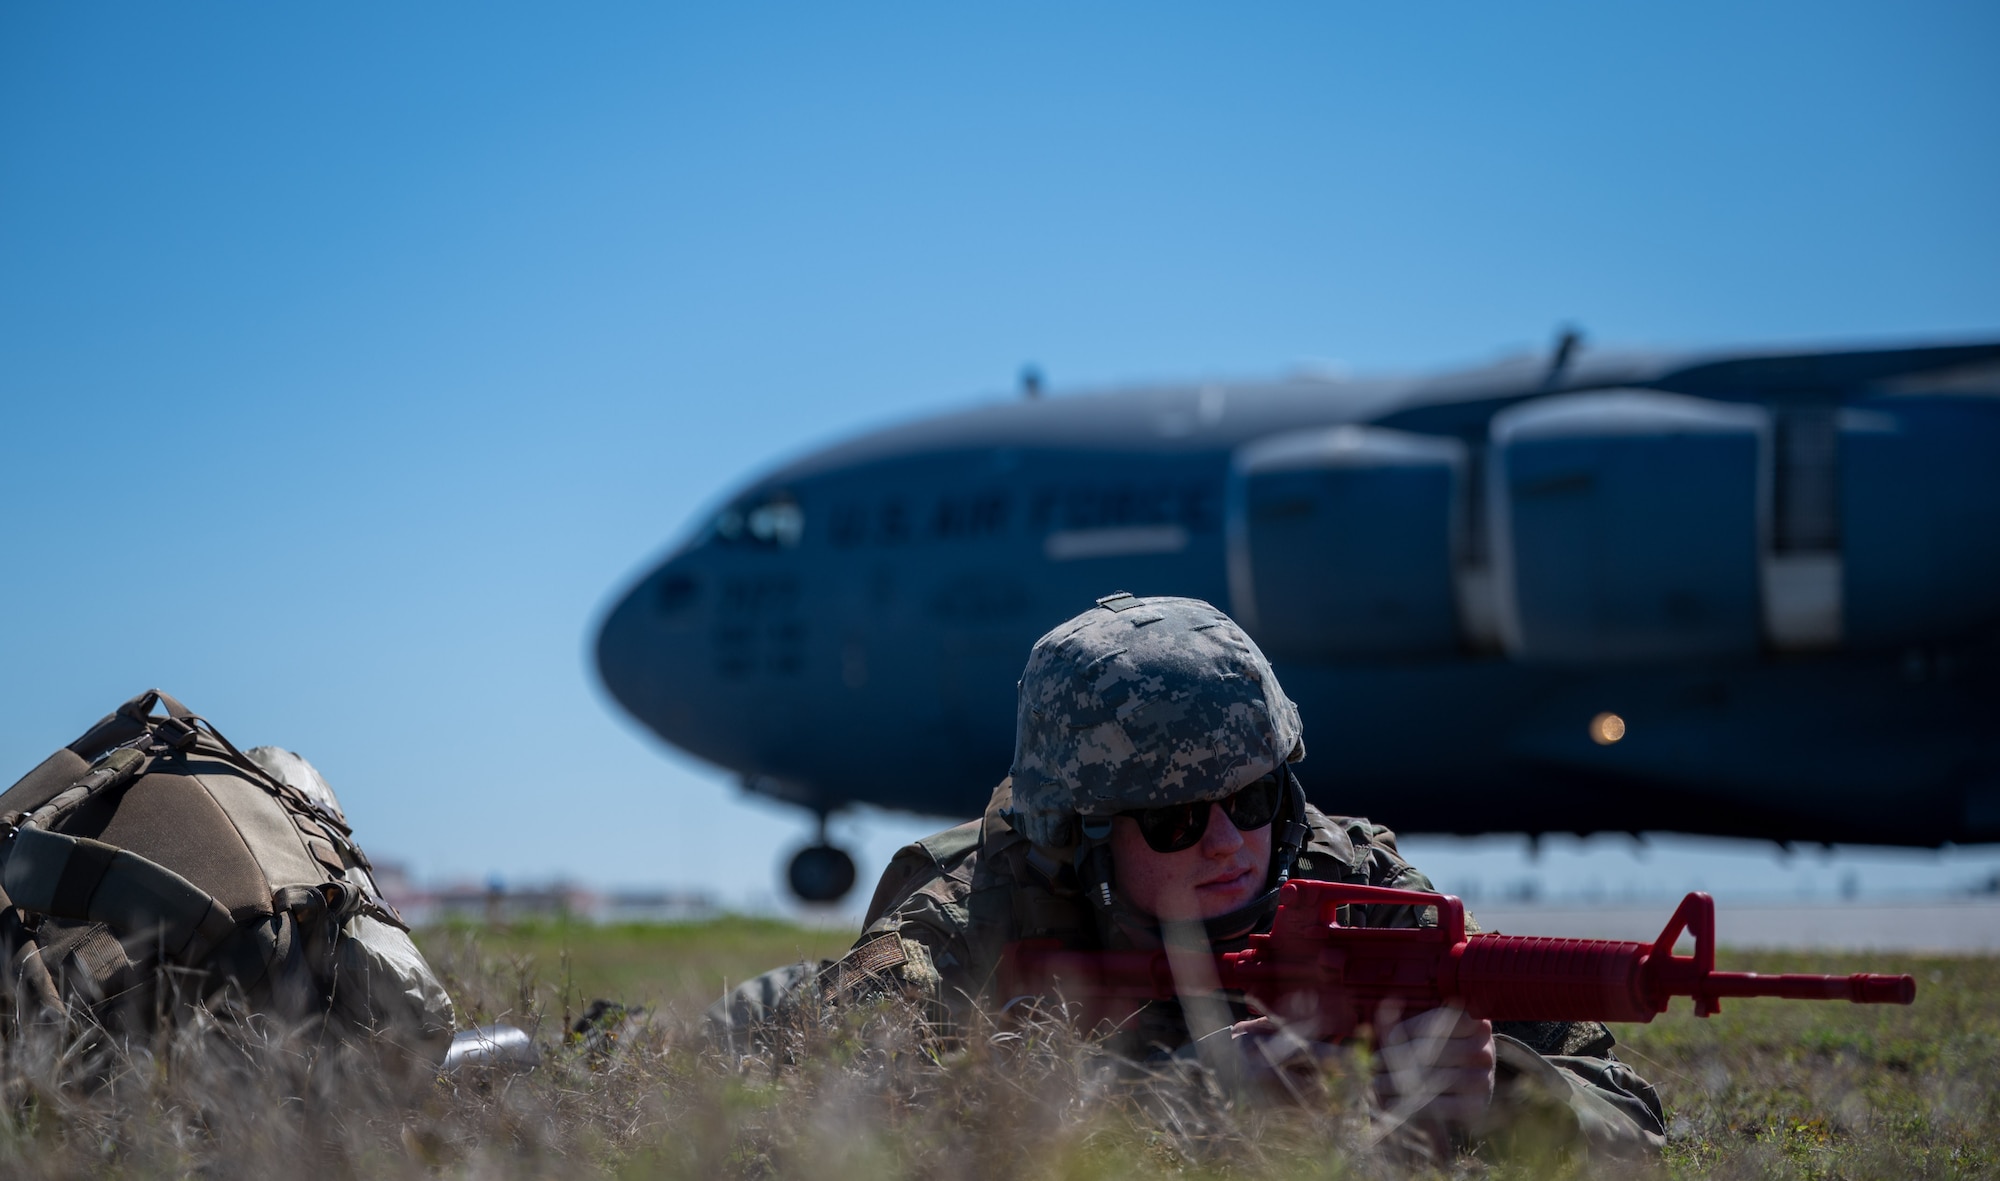 Senior Airman Brandon Hill, 23rd Aircraft Maintenance Squadron crew chief, guards a Dover Air Force Base C-17 Globemaster III during Exercise Mosaic Tiger at Patrick Space Force Base, Florida, Feb. 25, 2021. Mosaic Tiger is an agile combat employment exercise, led by the 23rd Wing, Moody AFB, Georgia, designed to test multi-capable Airmen skills in a simulated downrange environment. Airmen from four different bases, representing two major commands, participated in the exercise that included multiple Air and Space Force installations. (U.S. Air Force photo by Airman 1st Class Faith Schaefer)